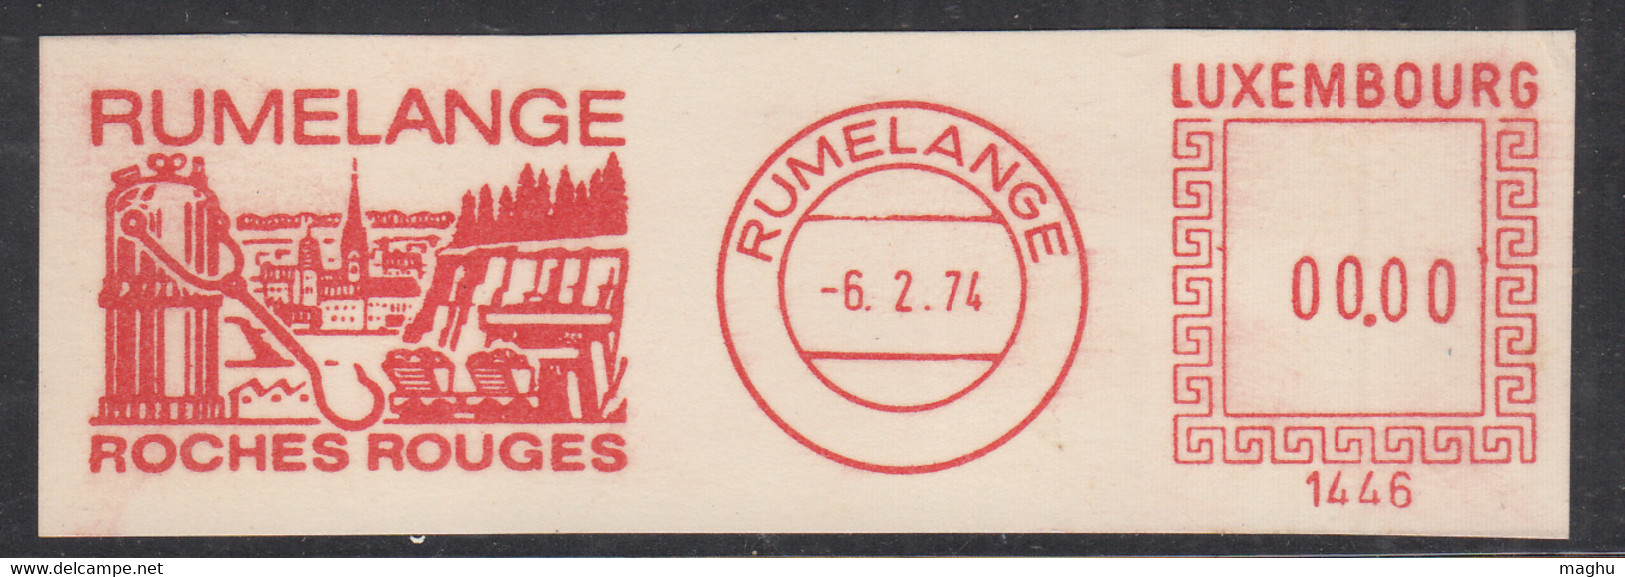 00.00 Value, Trial Meter Cancellation?, ATM Machine Stamp, Luxemburg, Rumelange Rochhes Rouges, Mineral, Mining Tools, - Machines à Affranchir (EMA)